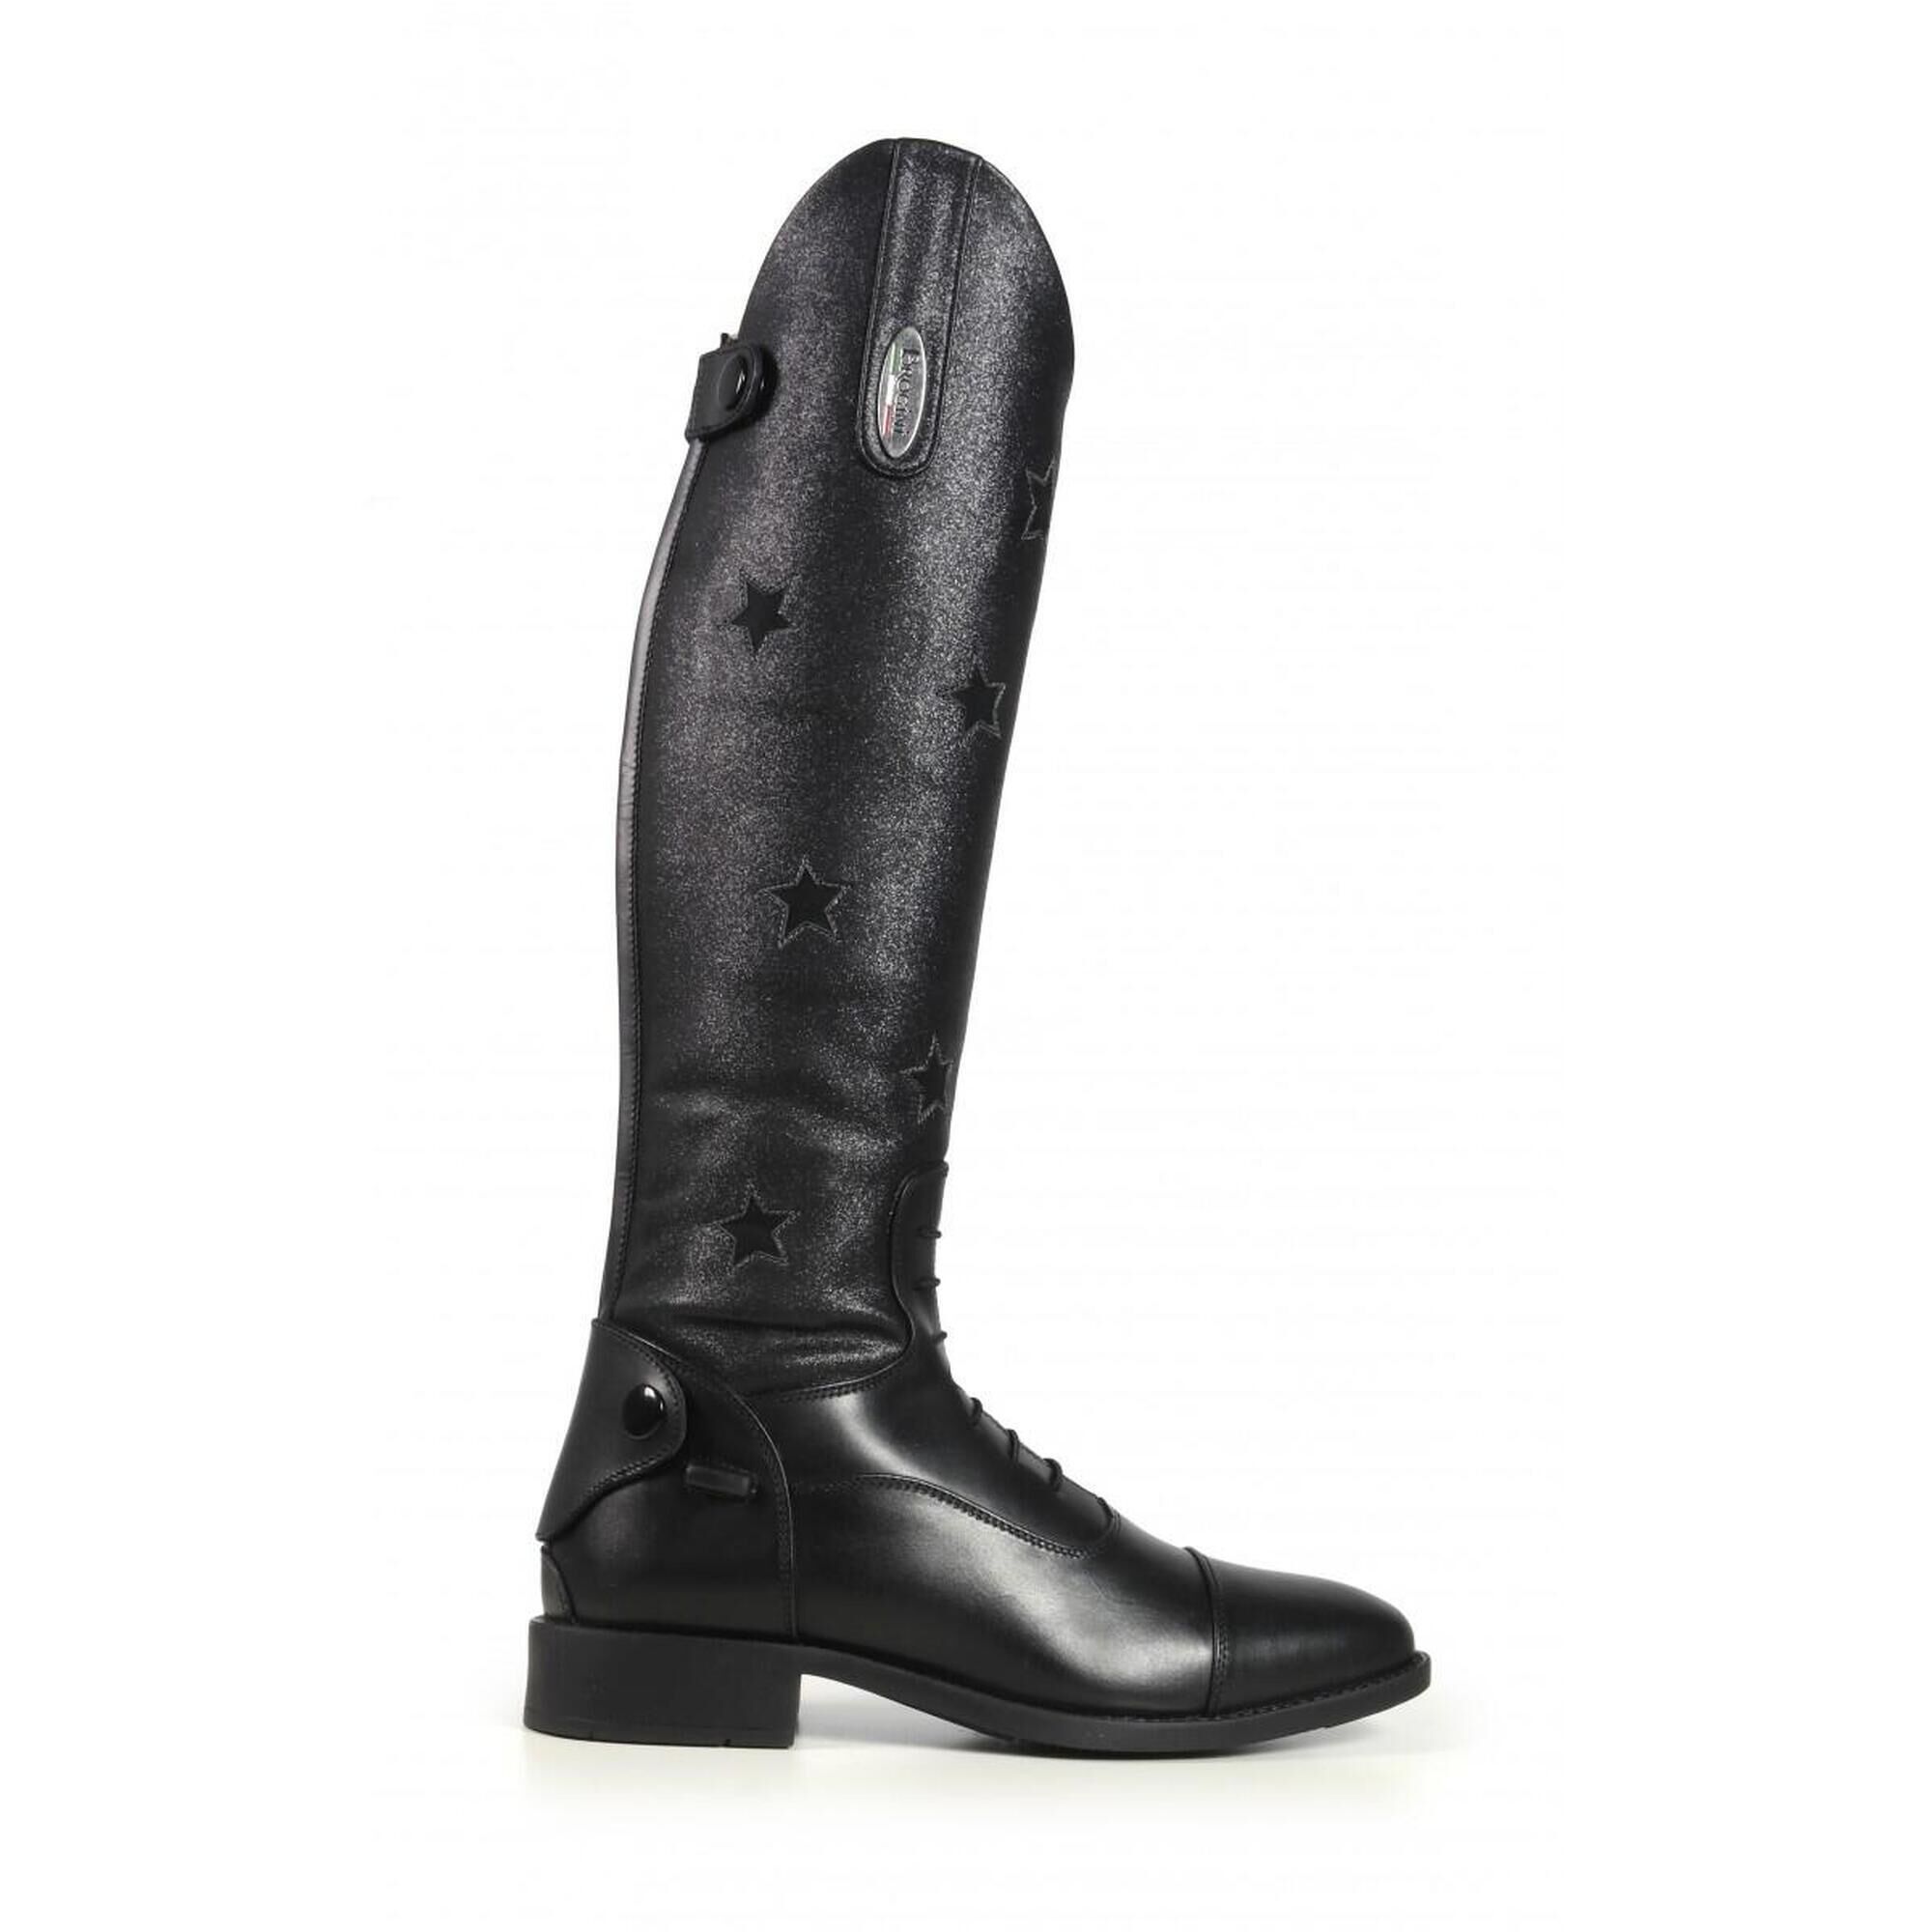 BROGINI Carina Piccino Childs Long Riding Boots- Wide Calf Fit